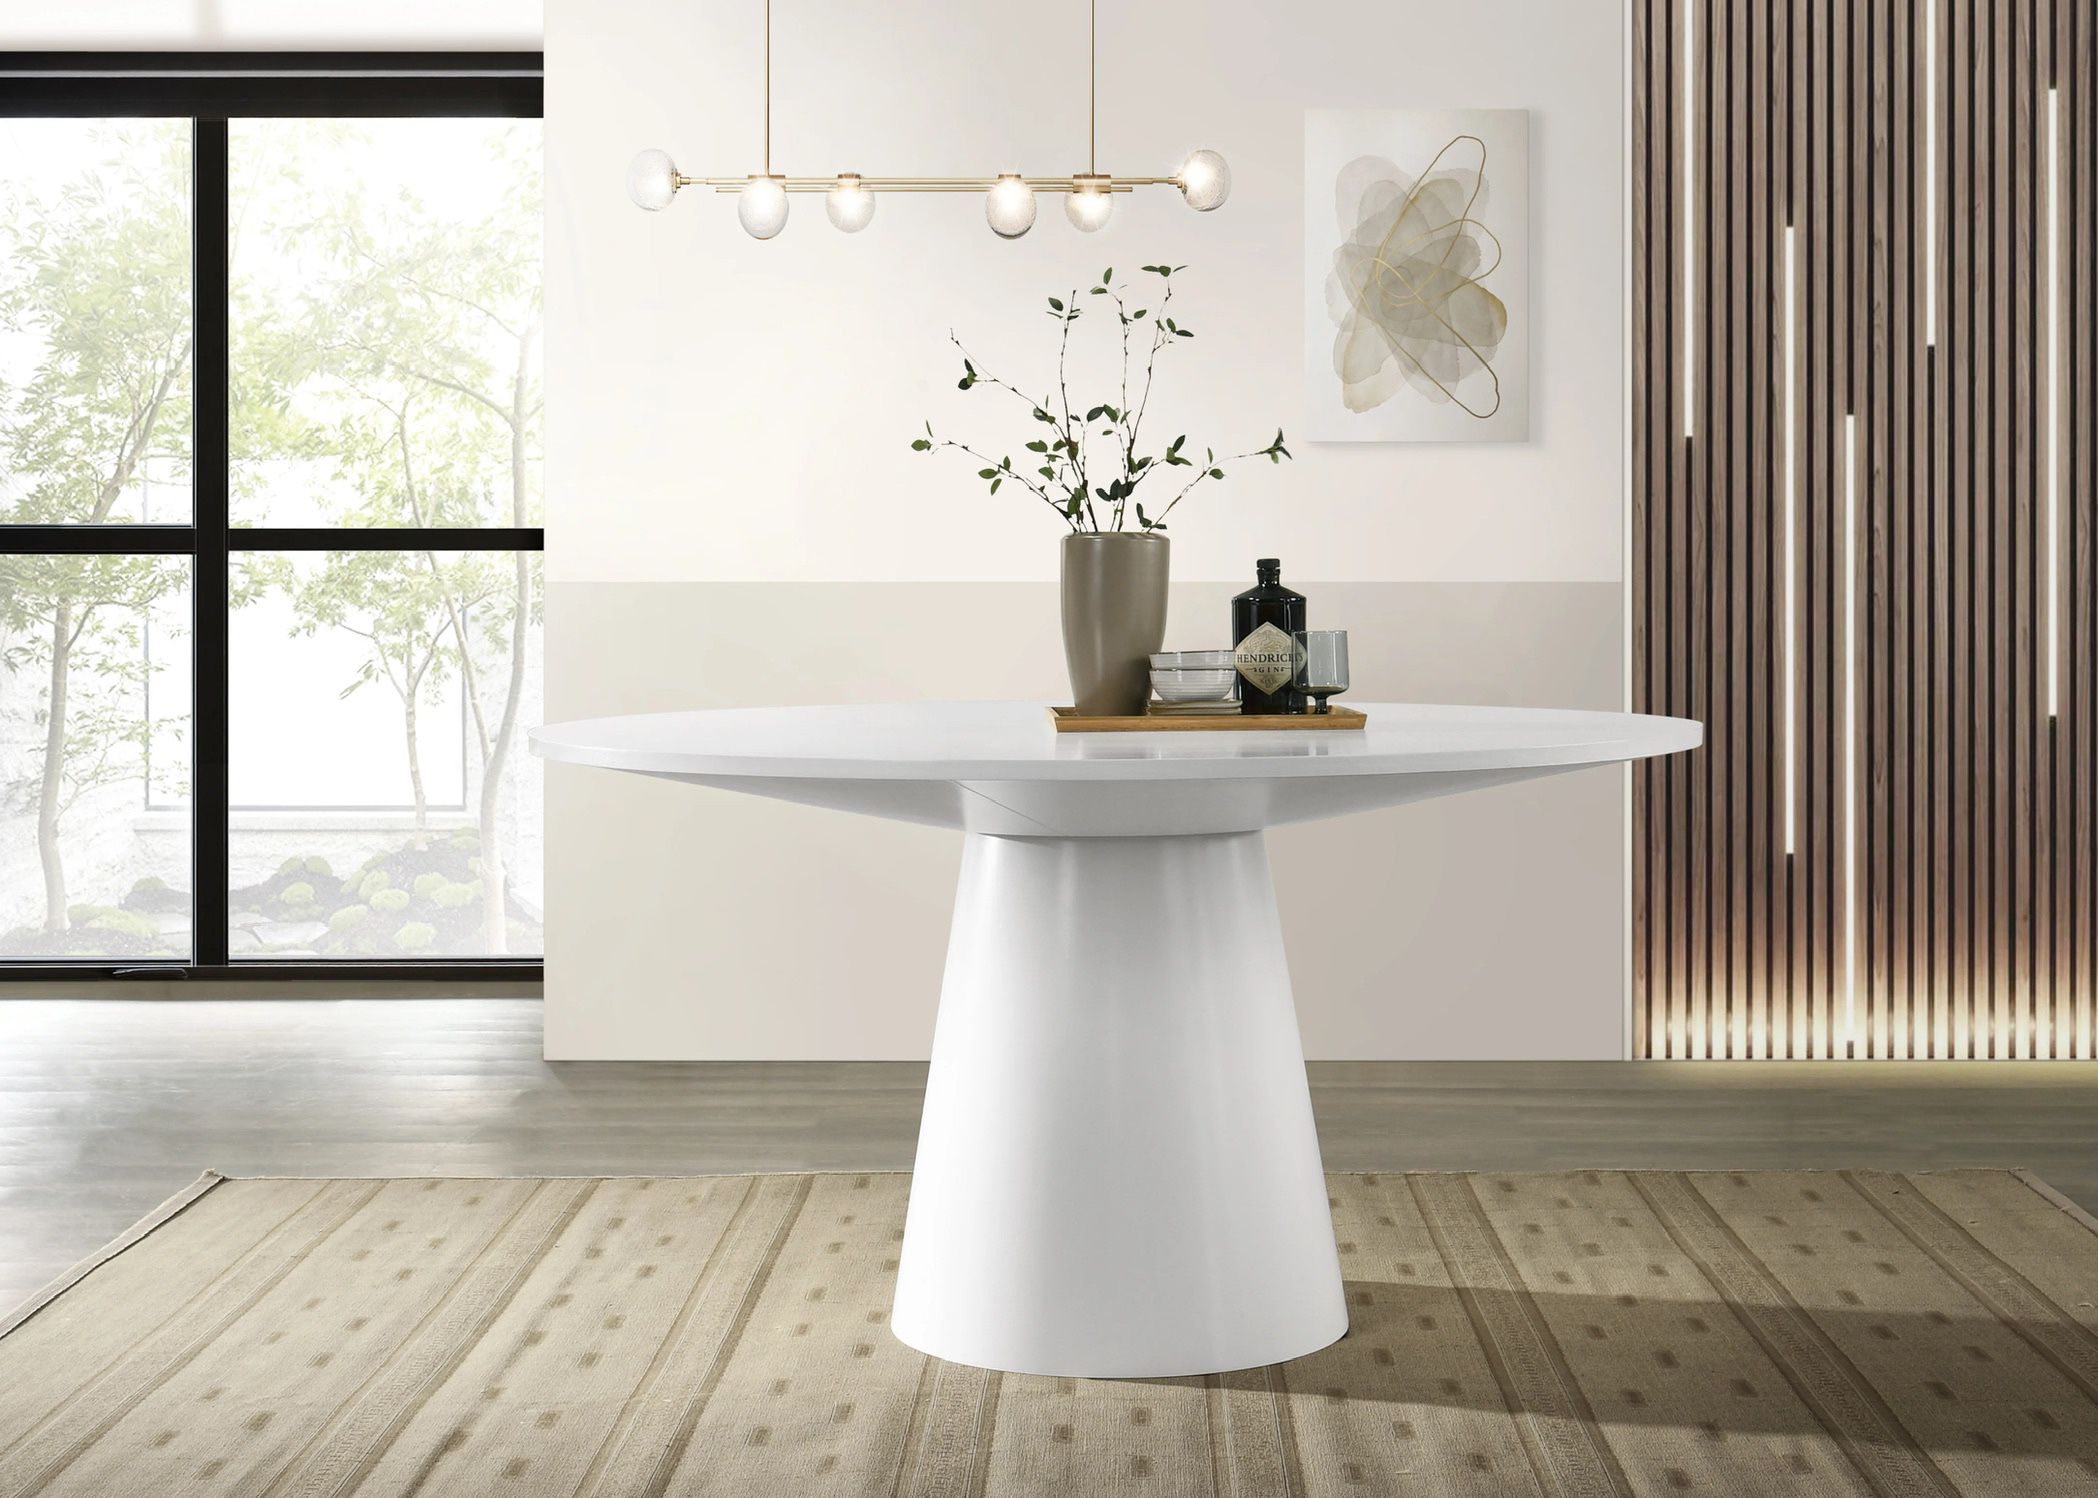 New White Round Dining Room Table 